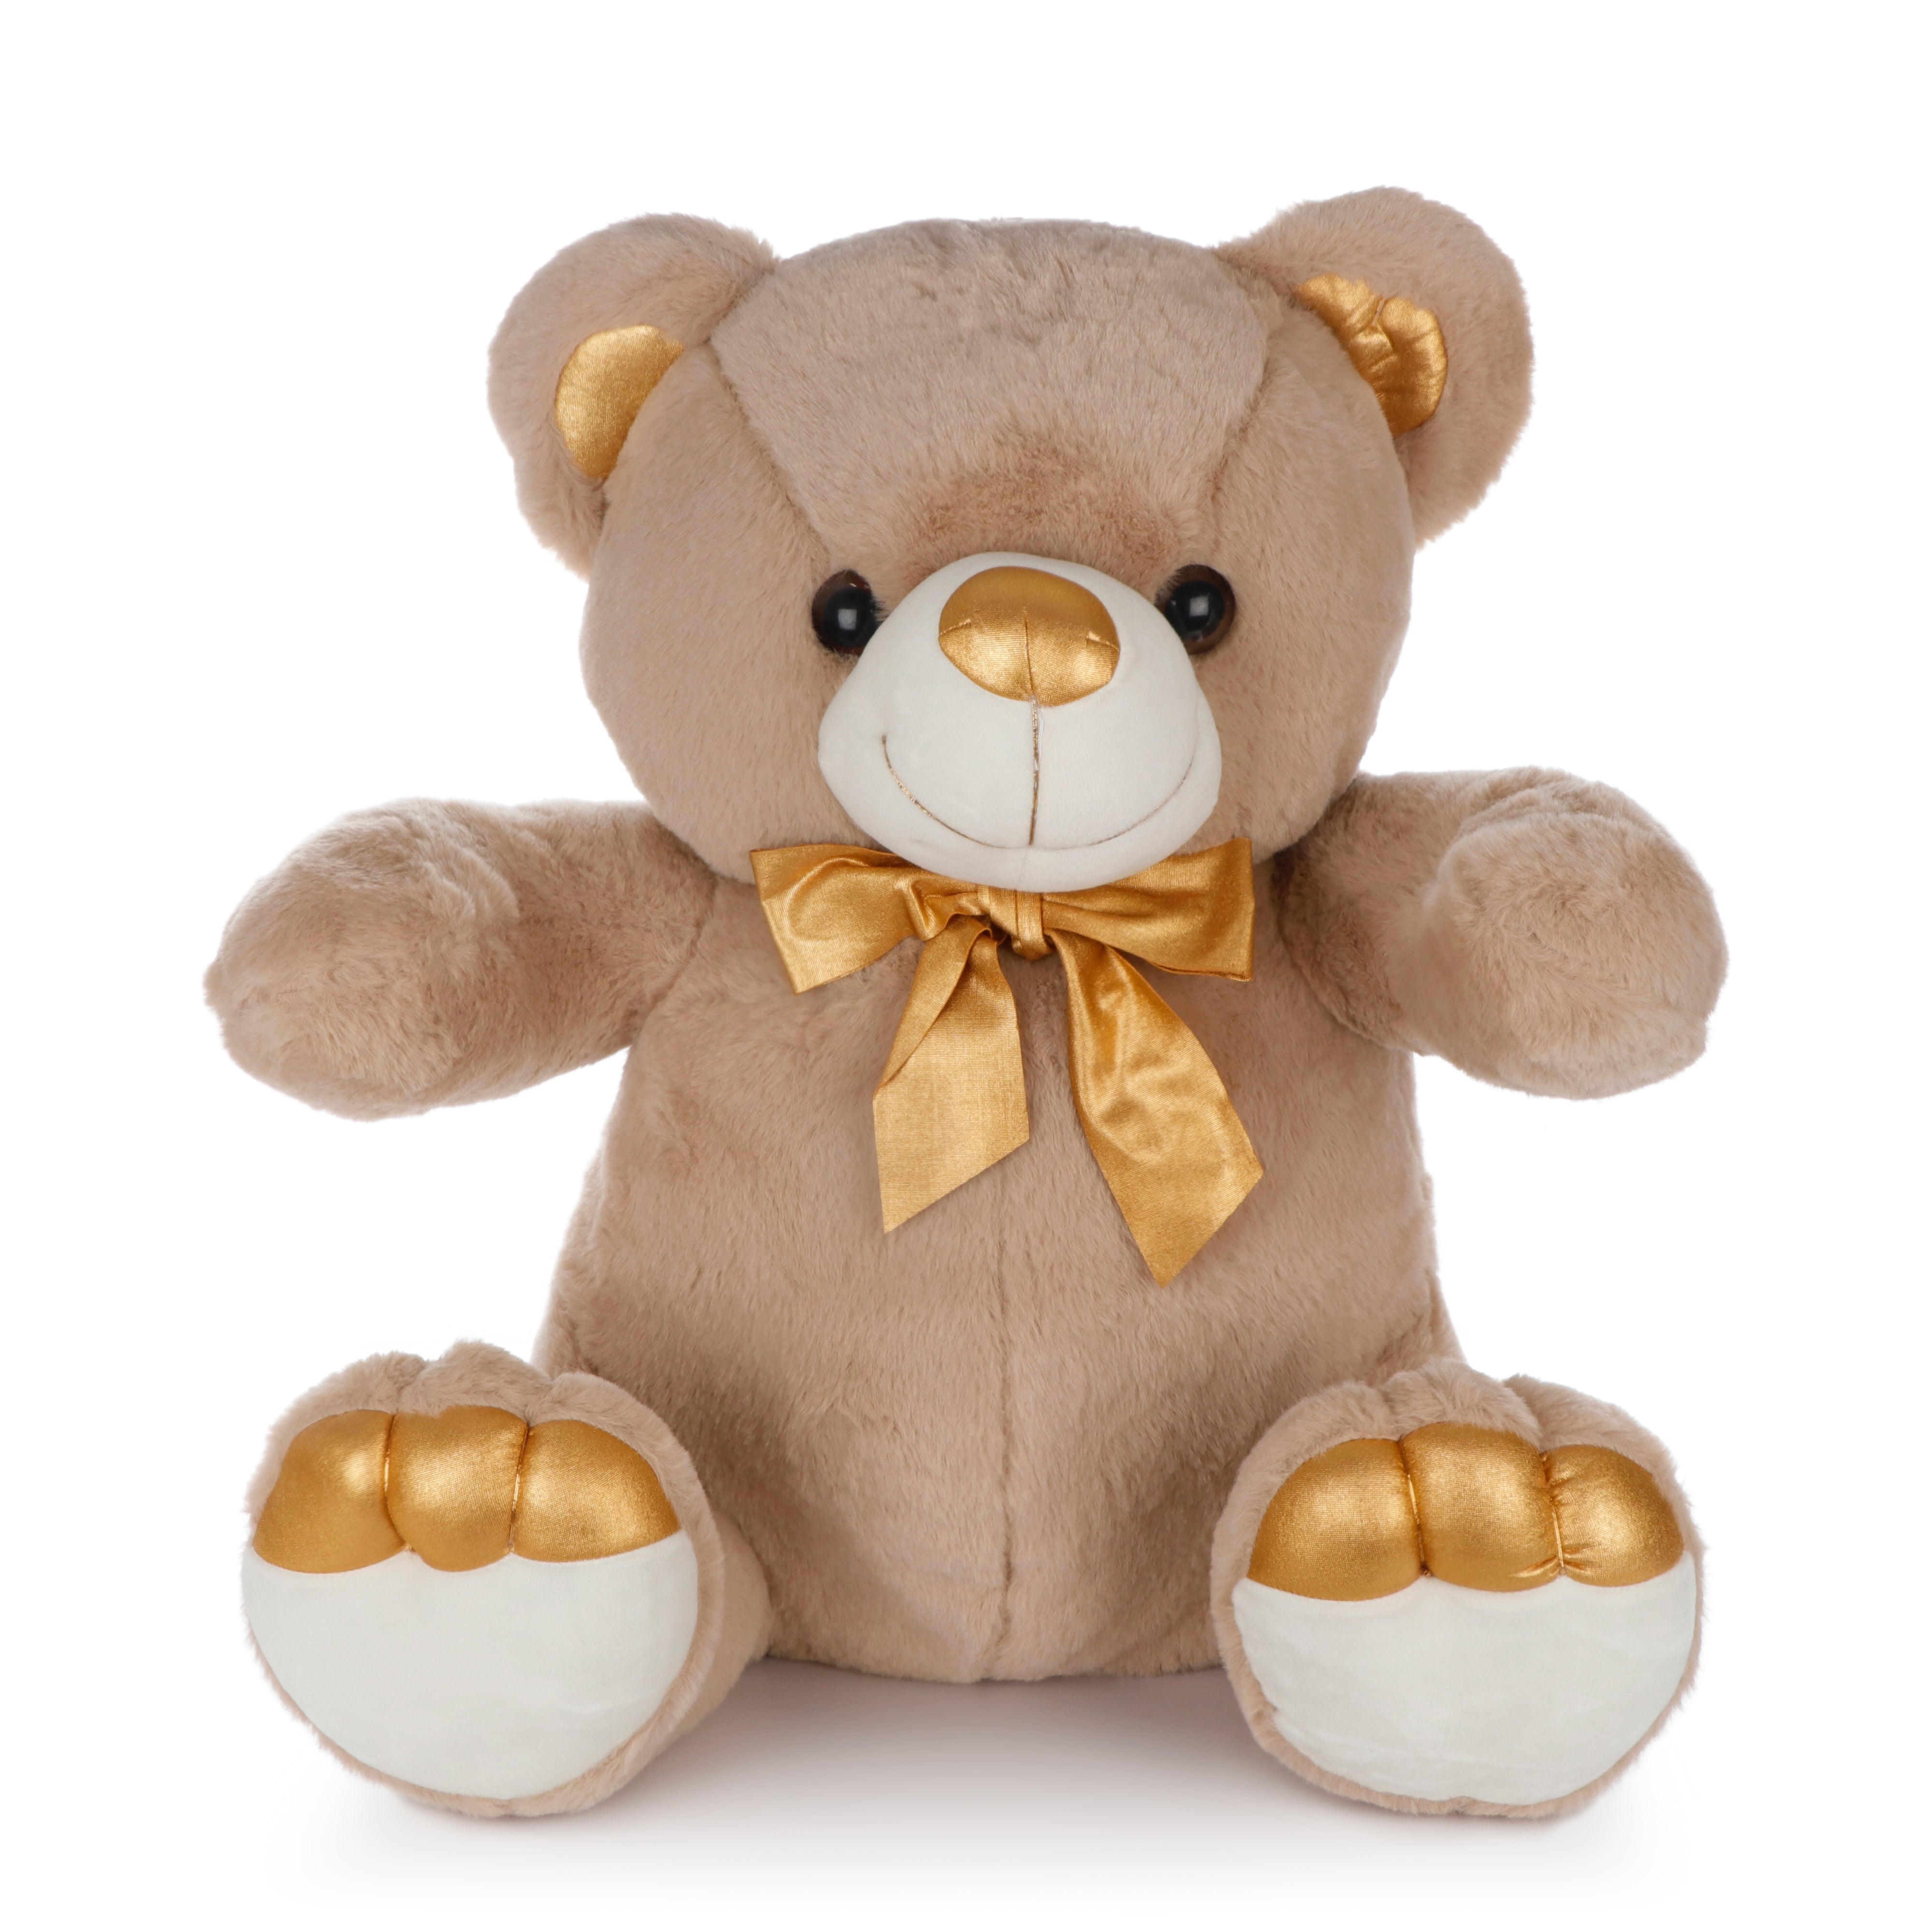 Archies | Archies Soft Toys, Teddy Bear For Girls, Soft Toys Boyfriend, Husband For Kids, Birthday Gift For Girls,Wife,   Brown Teddy Bear with Golden Paws - 50CM